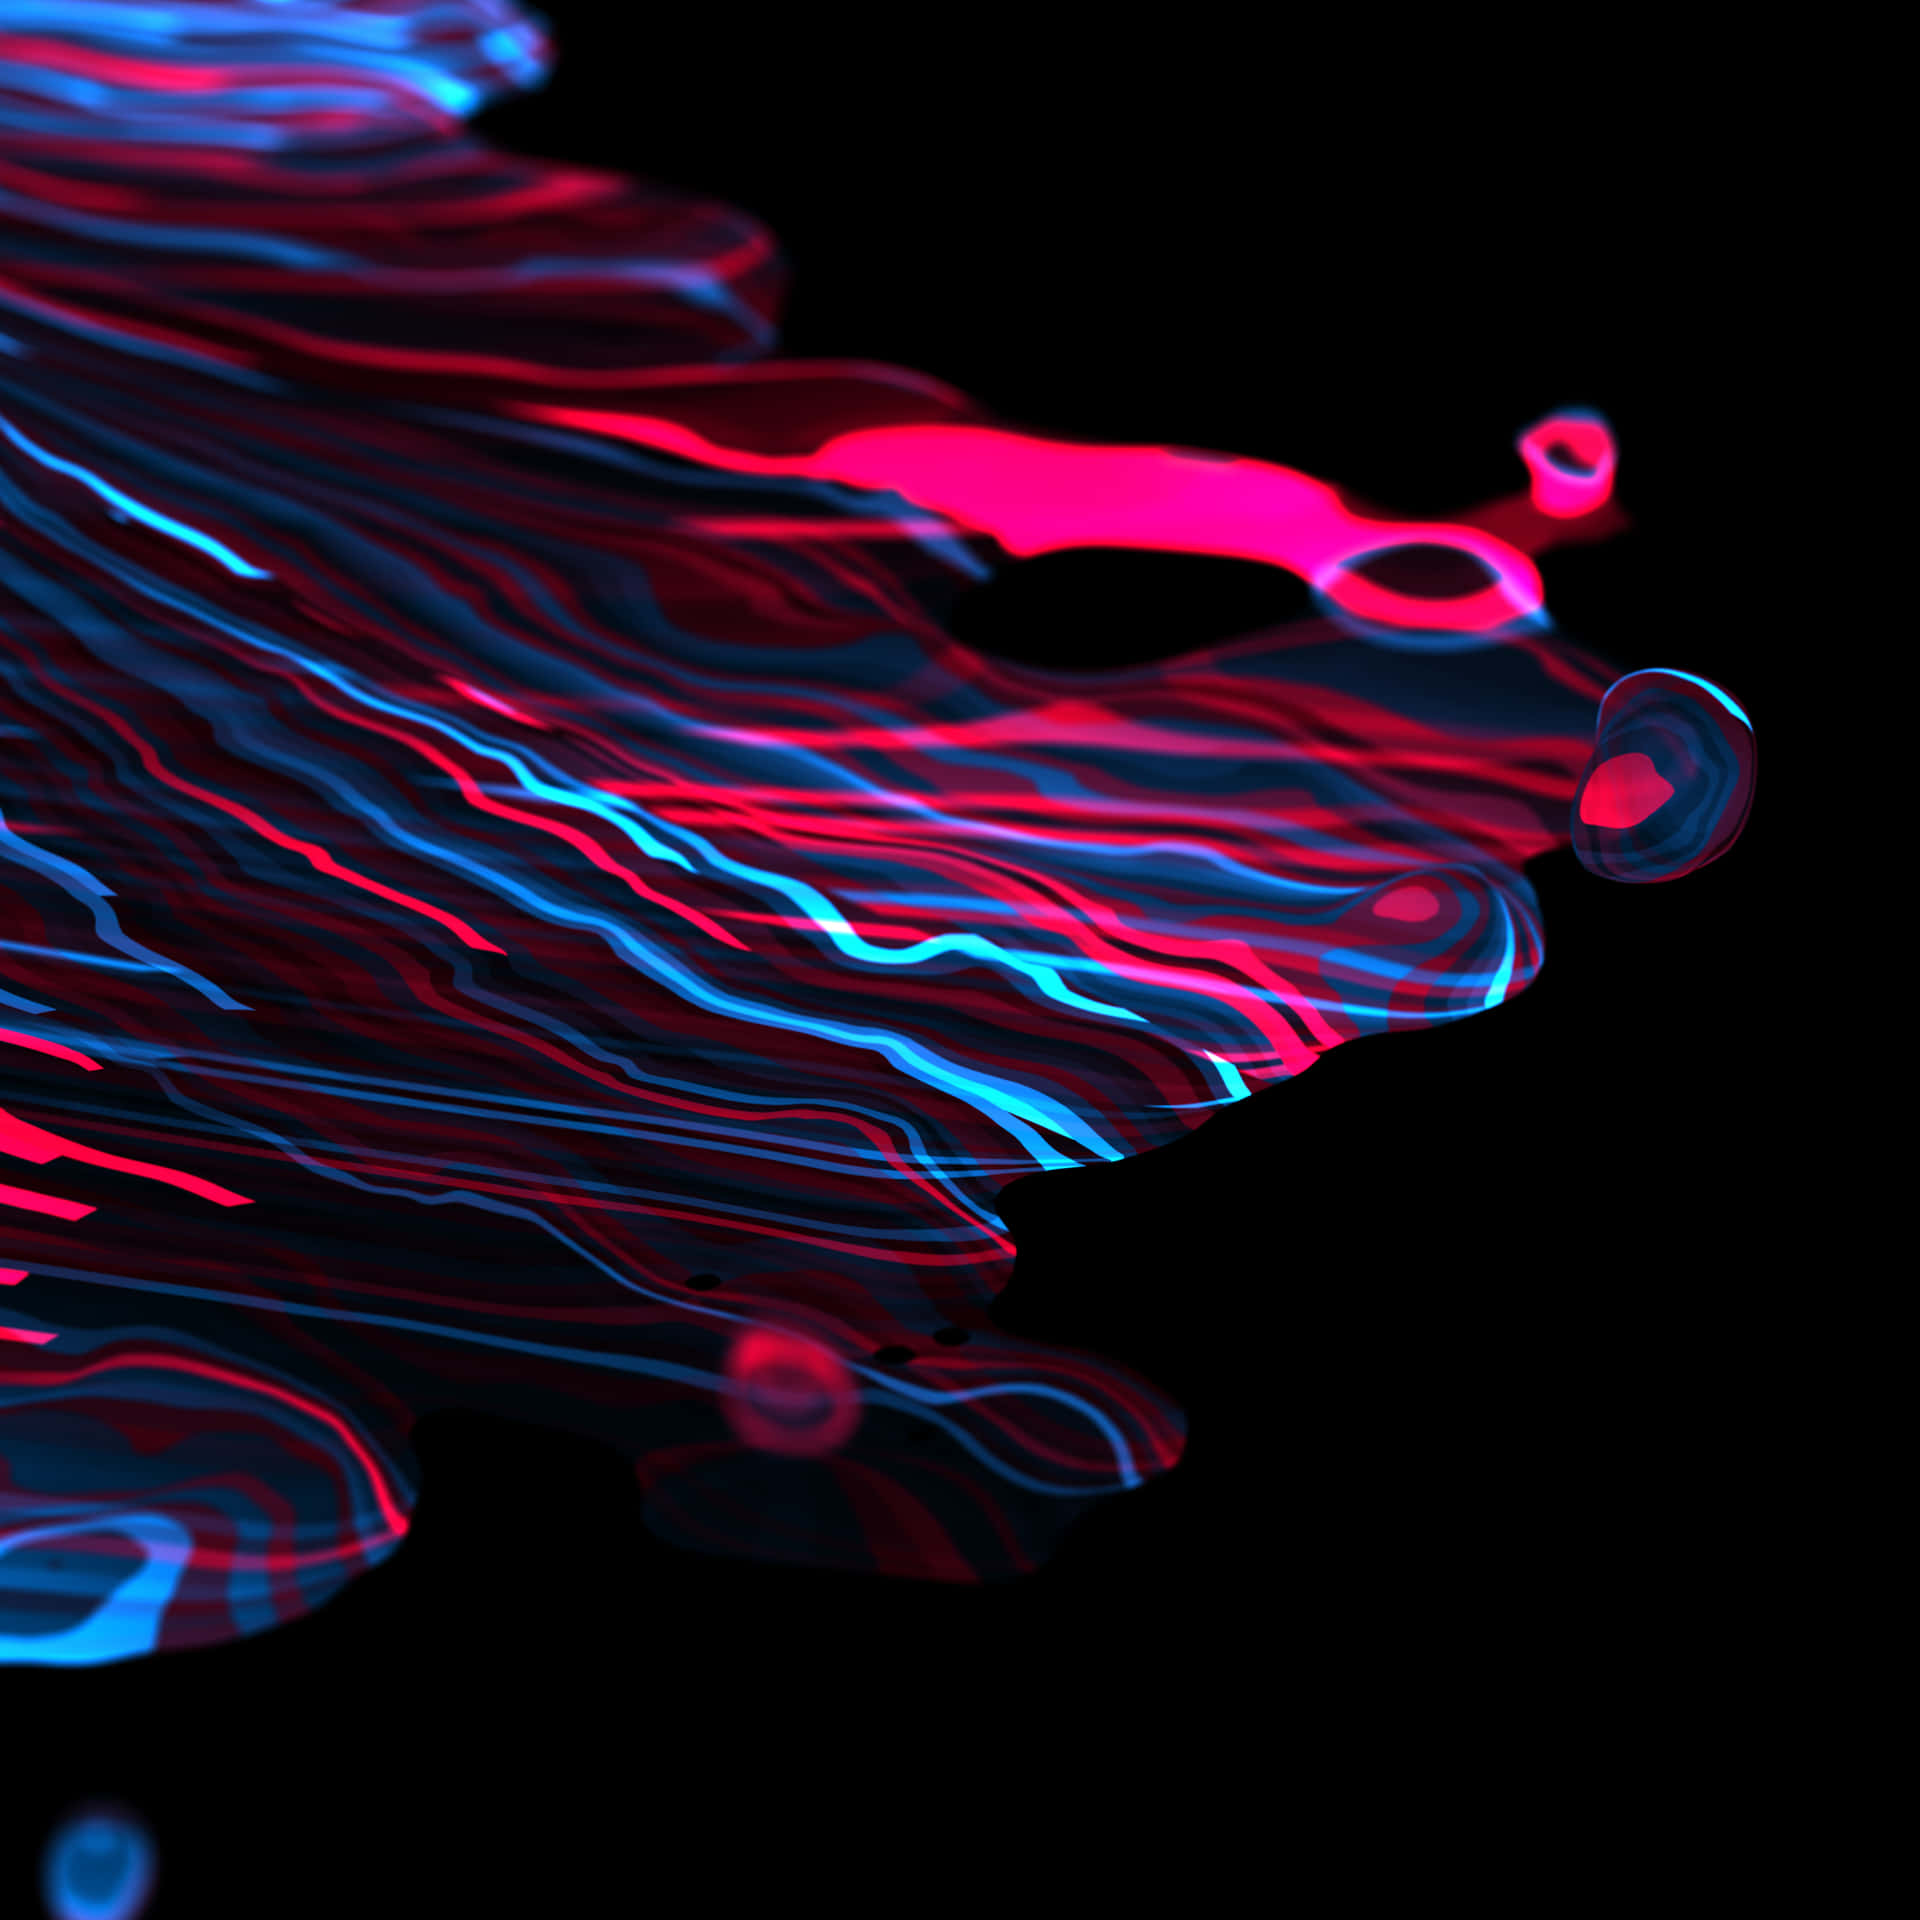 “Discover the vibrant colors of Super AMOLED Displays with Vibrant Super Amoled.” Wallpaper